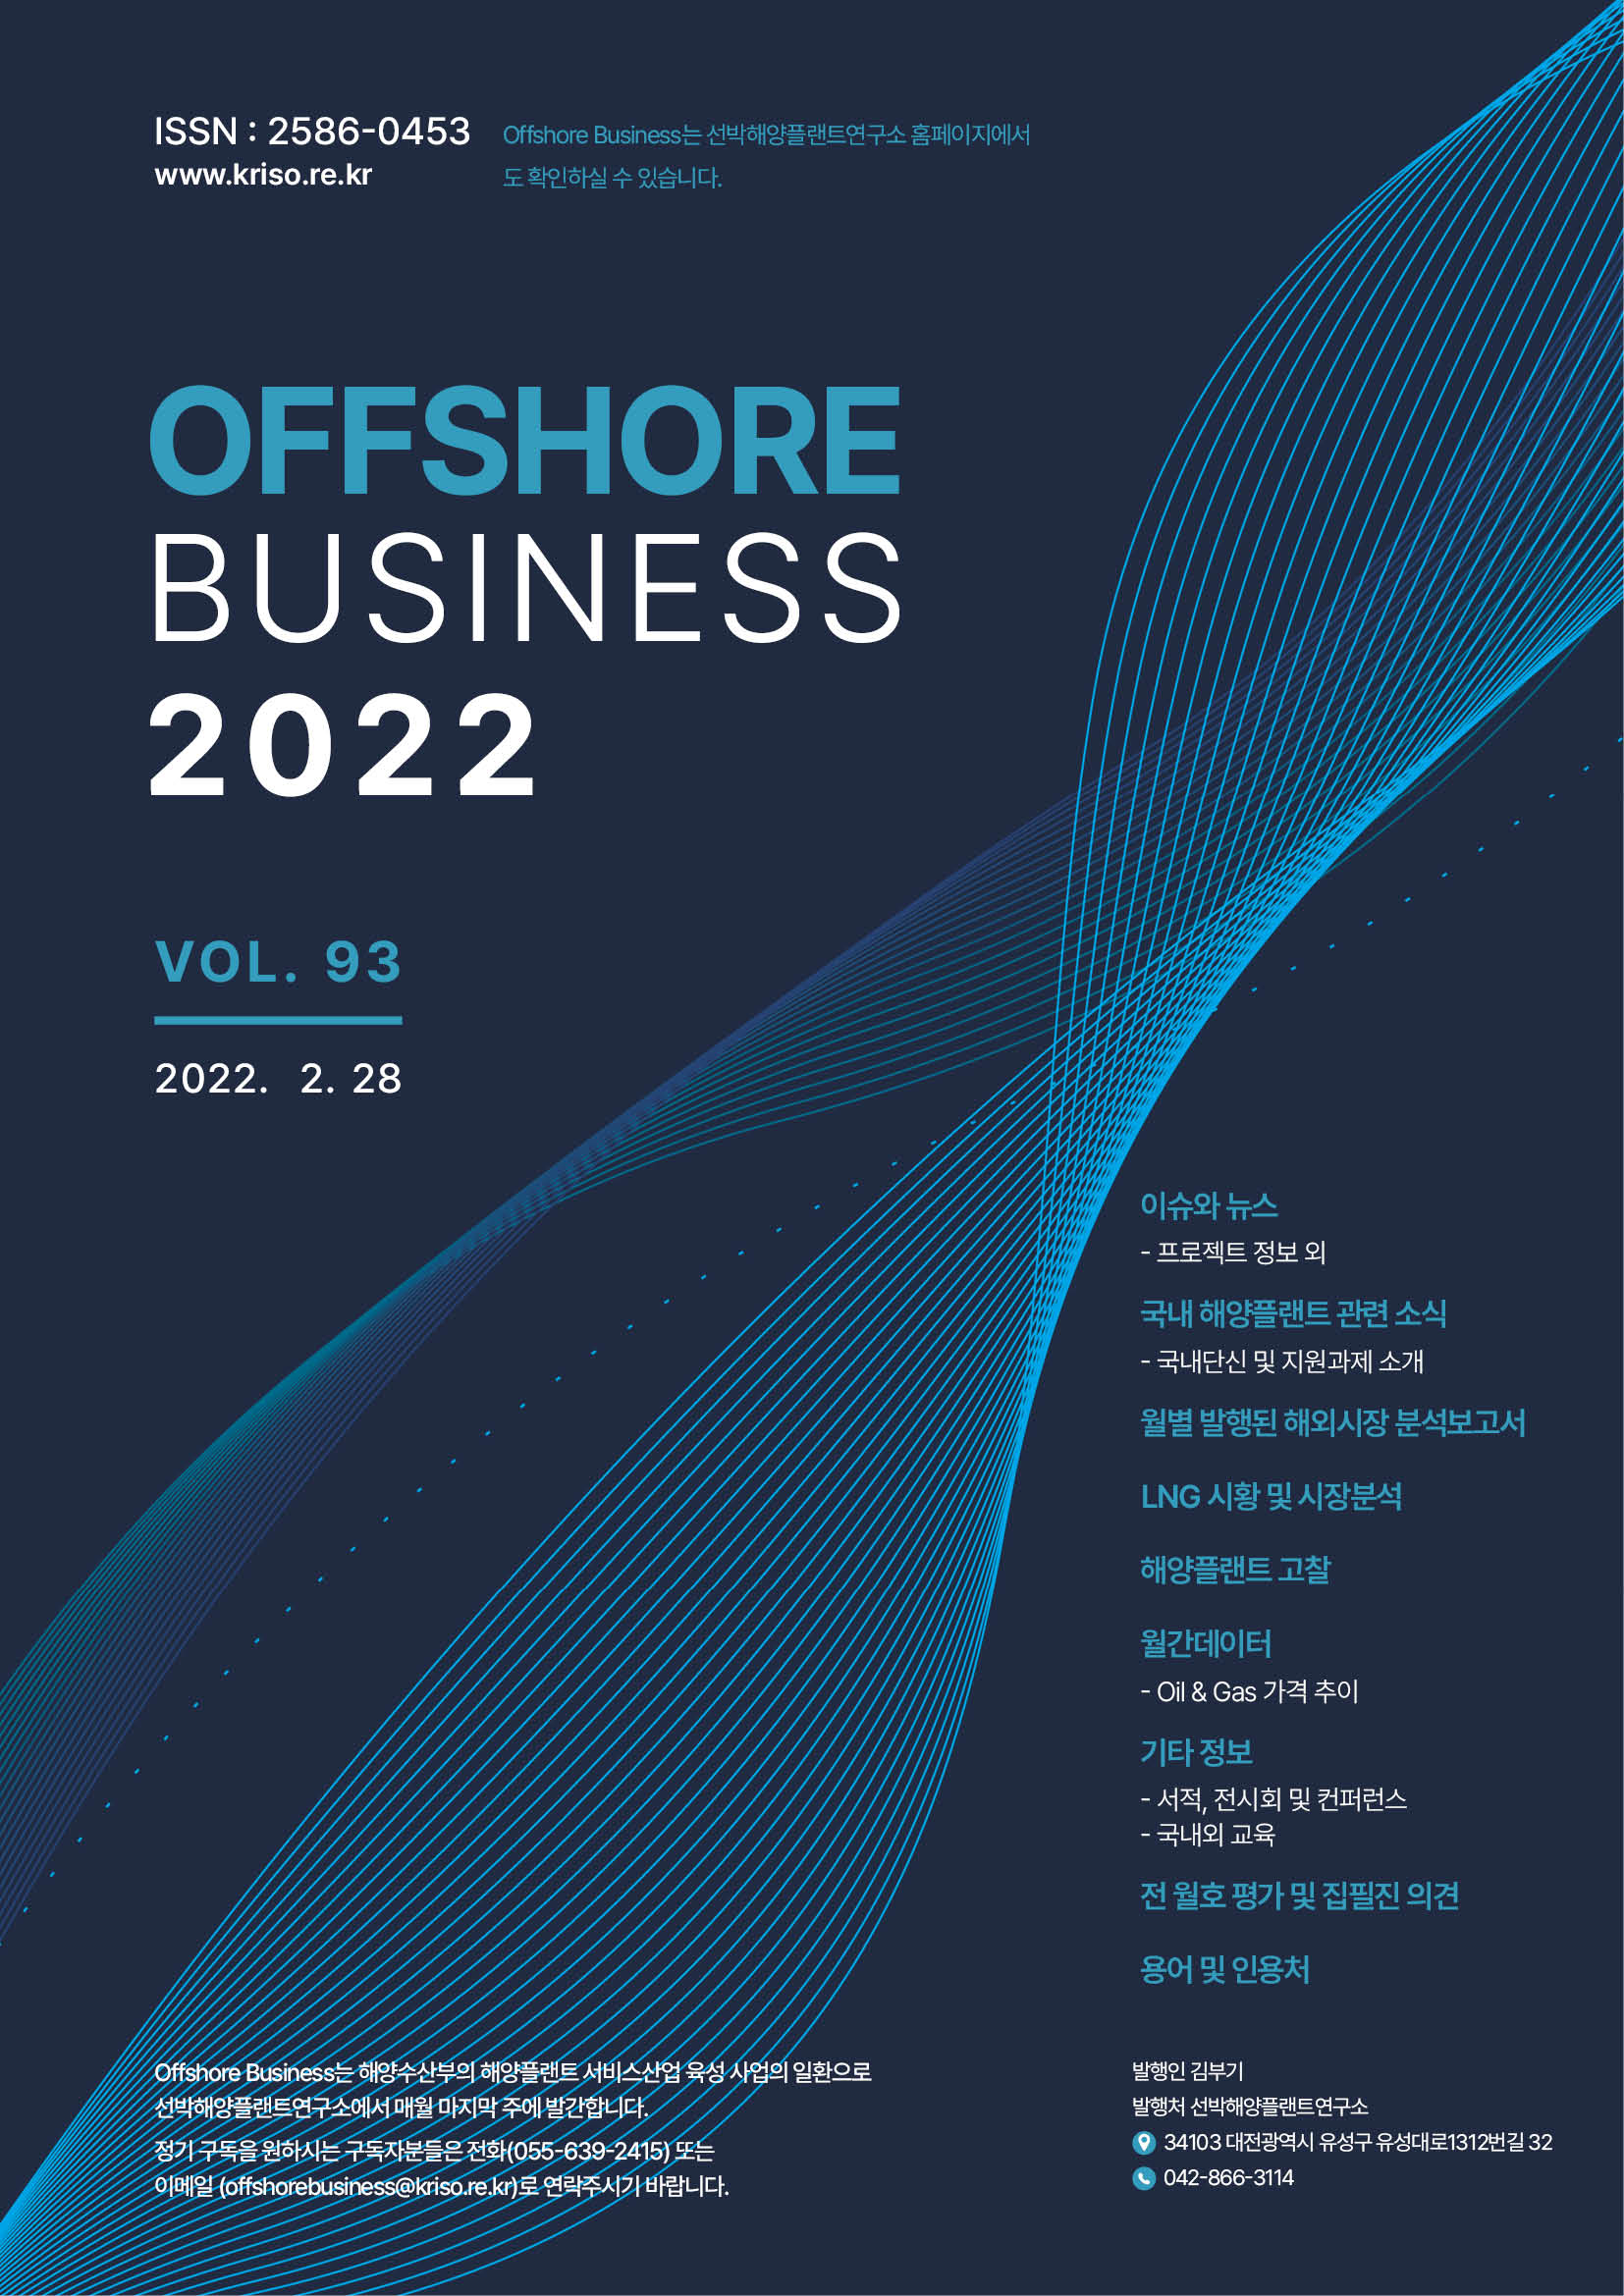  Offshore Business 93호